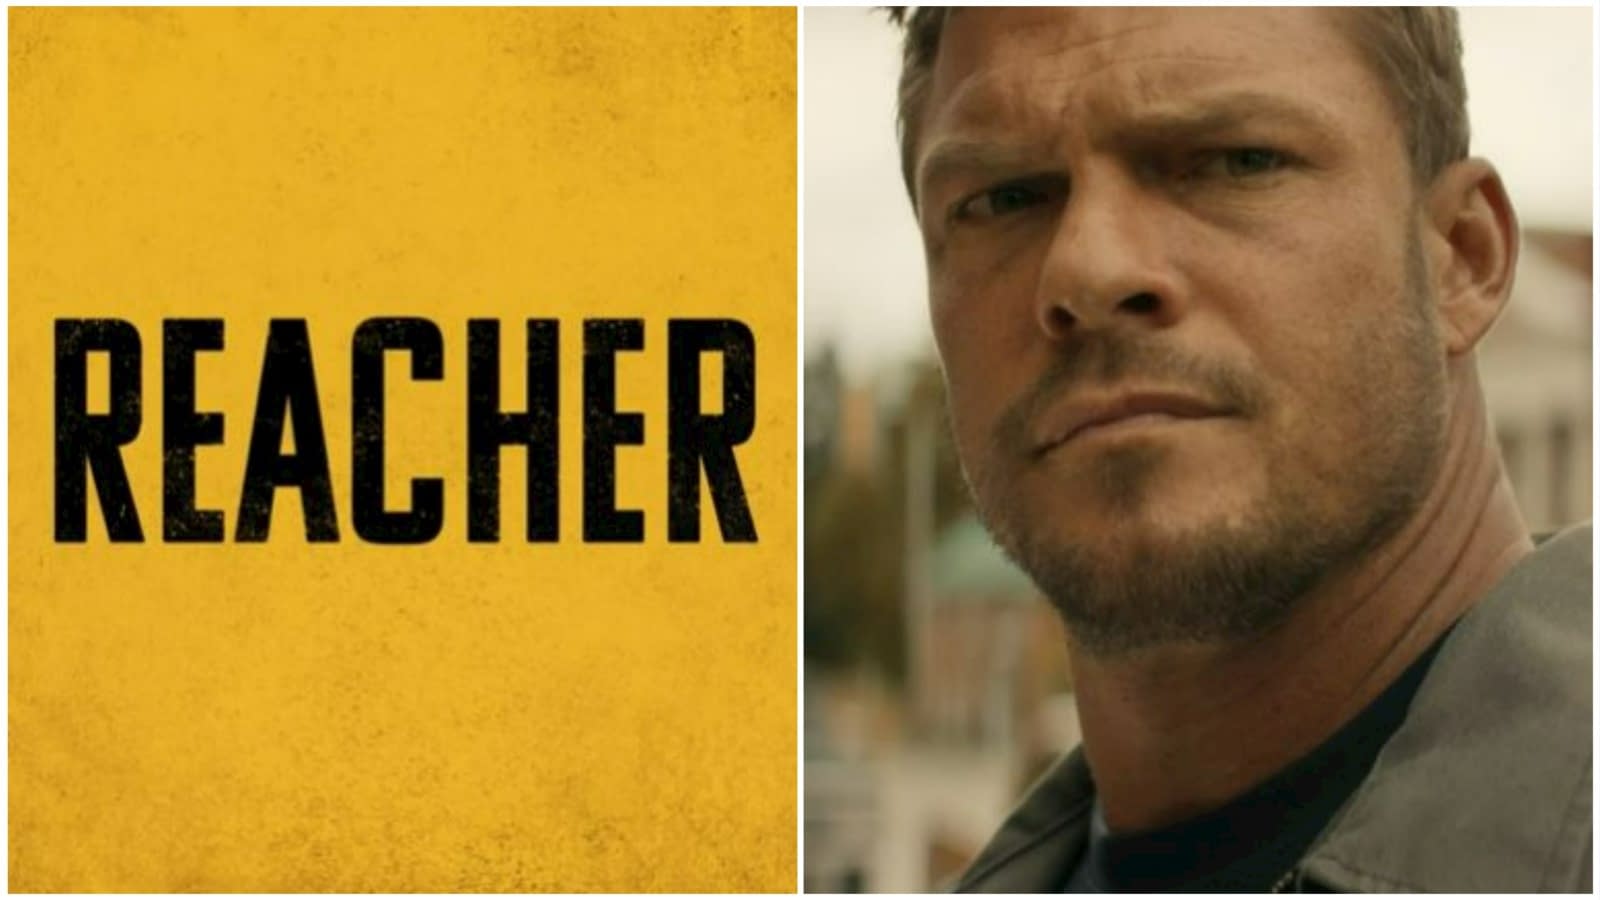 Reacher confirms season 2 release date with new trailer